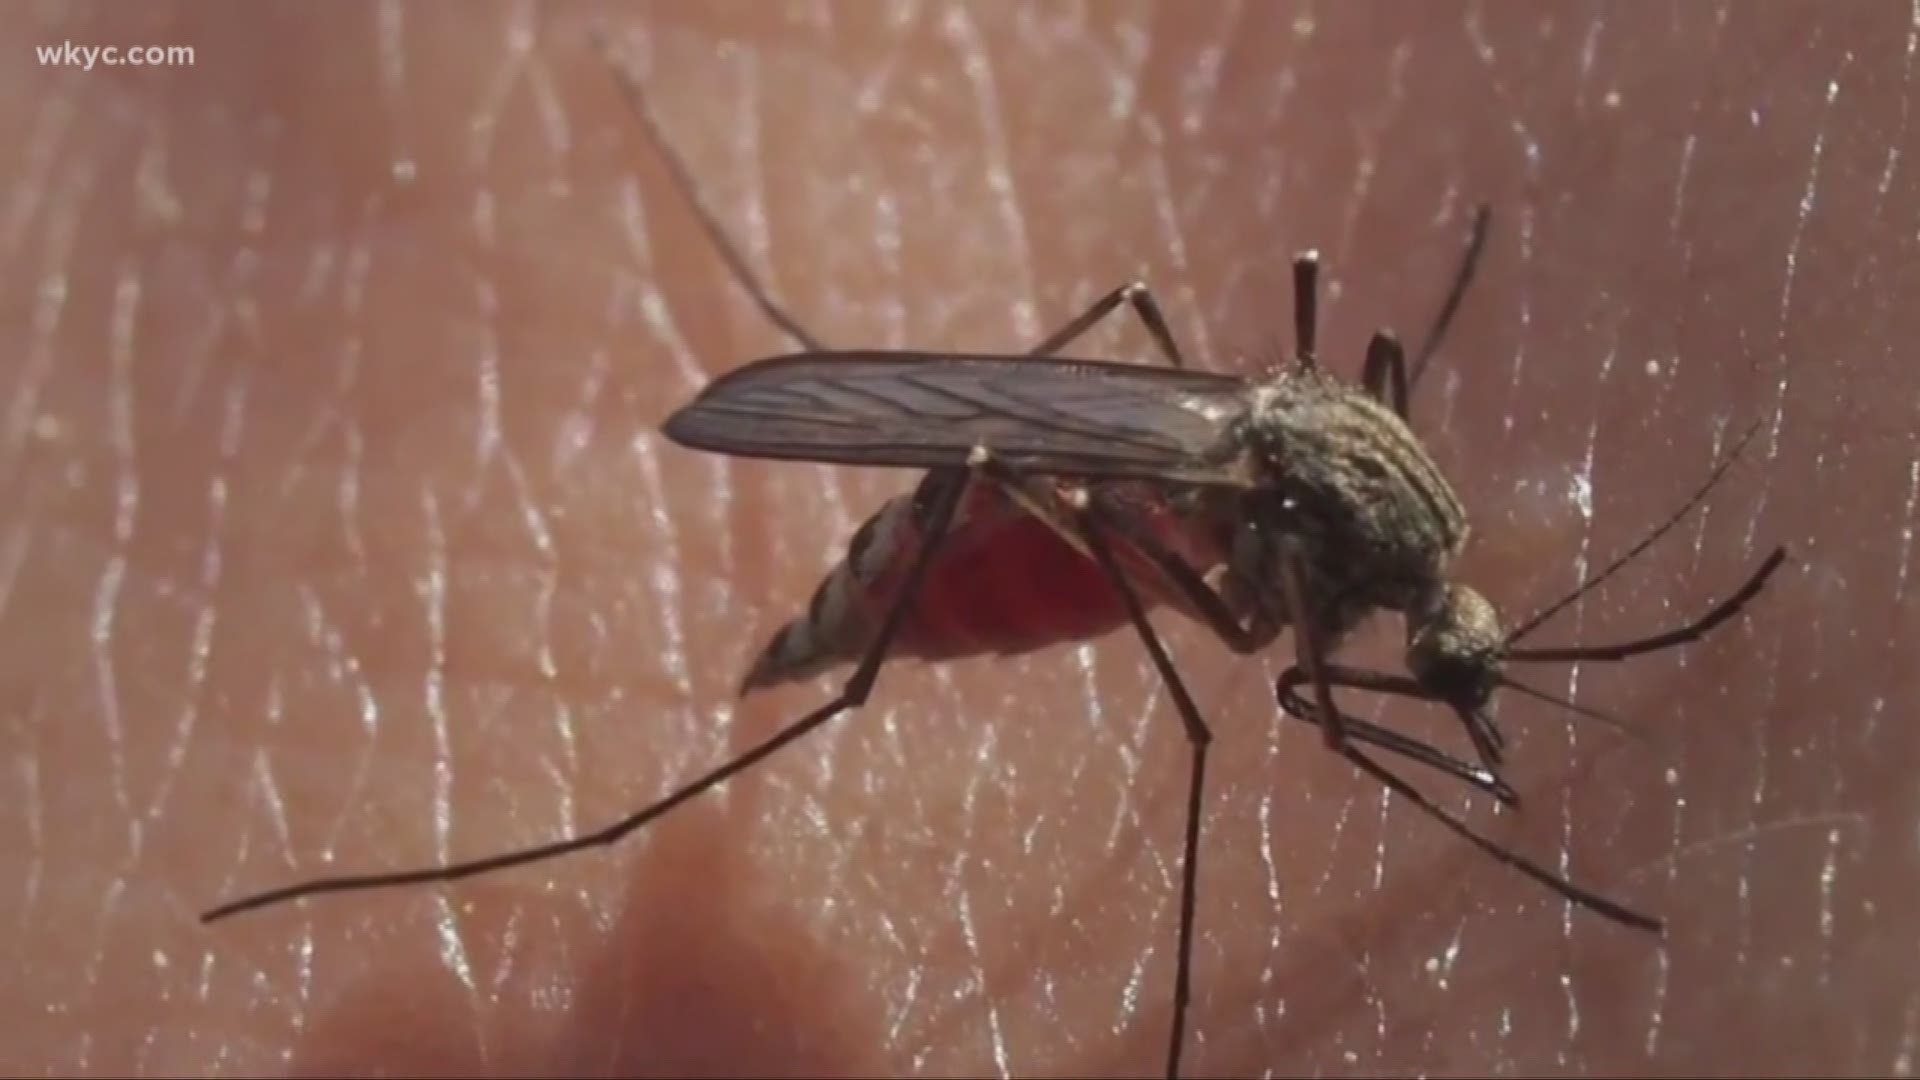 July 17, 2018: Health officials confirm a mosquito pool in Lake County has tested positive for West Nile Virus.